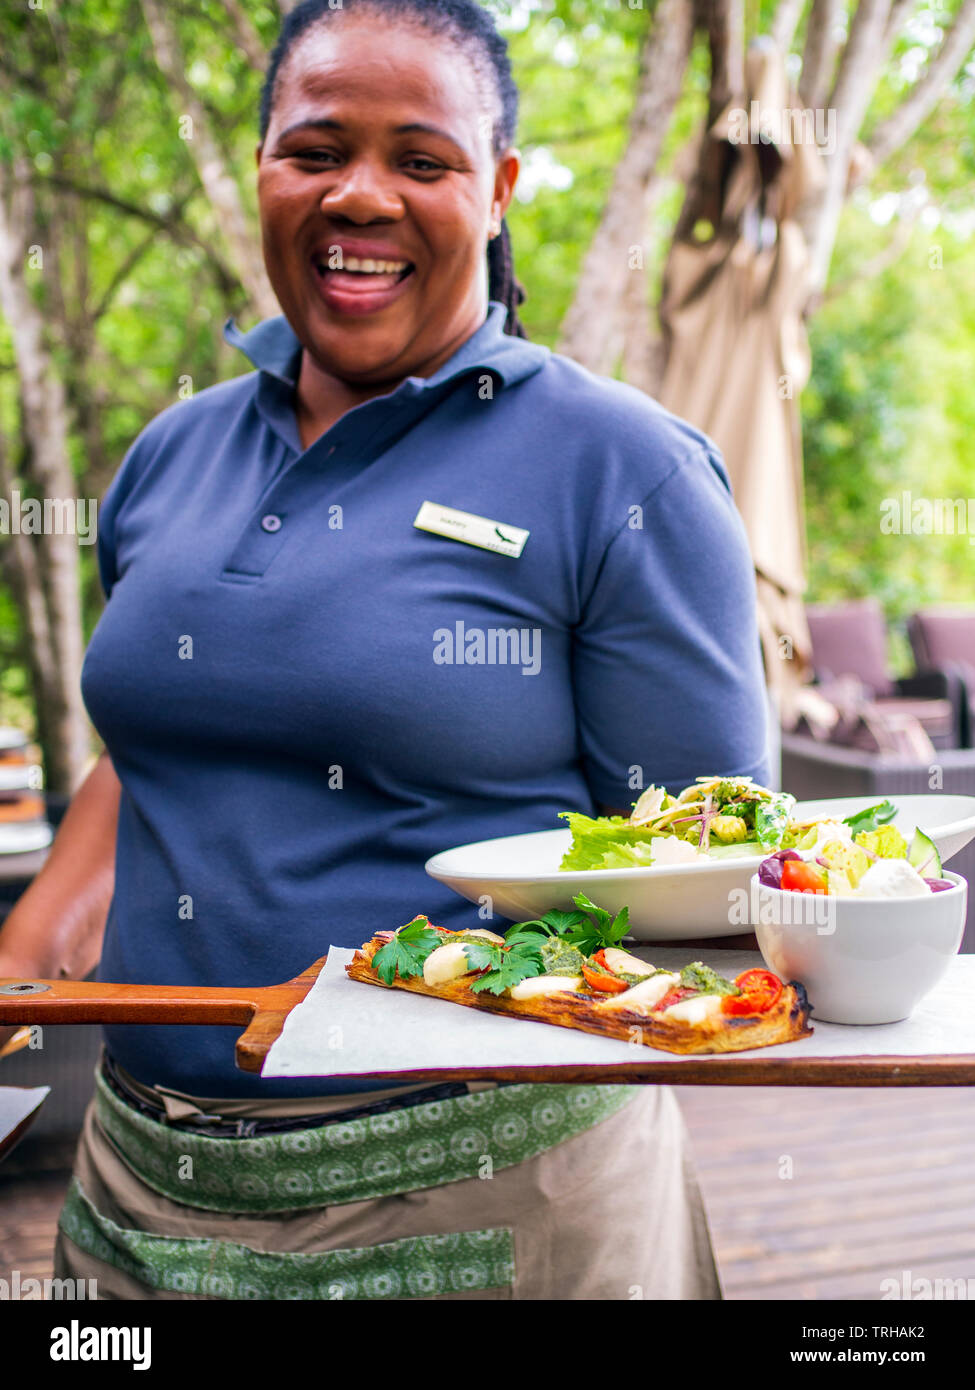 A staff member serves lunch at the Phinda Forest Lodge, one of several luxury lodges inside the Phinda Private Game Reserve,South Africa. Stock Photo